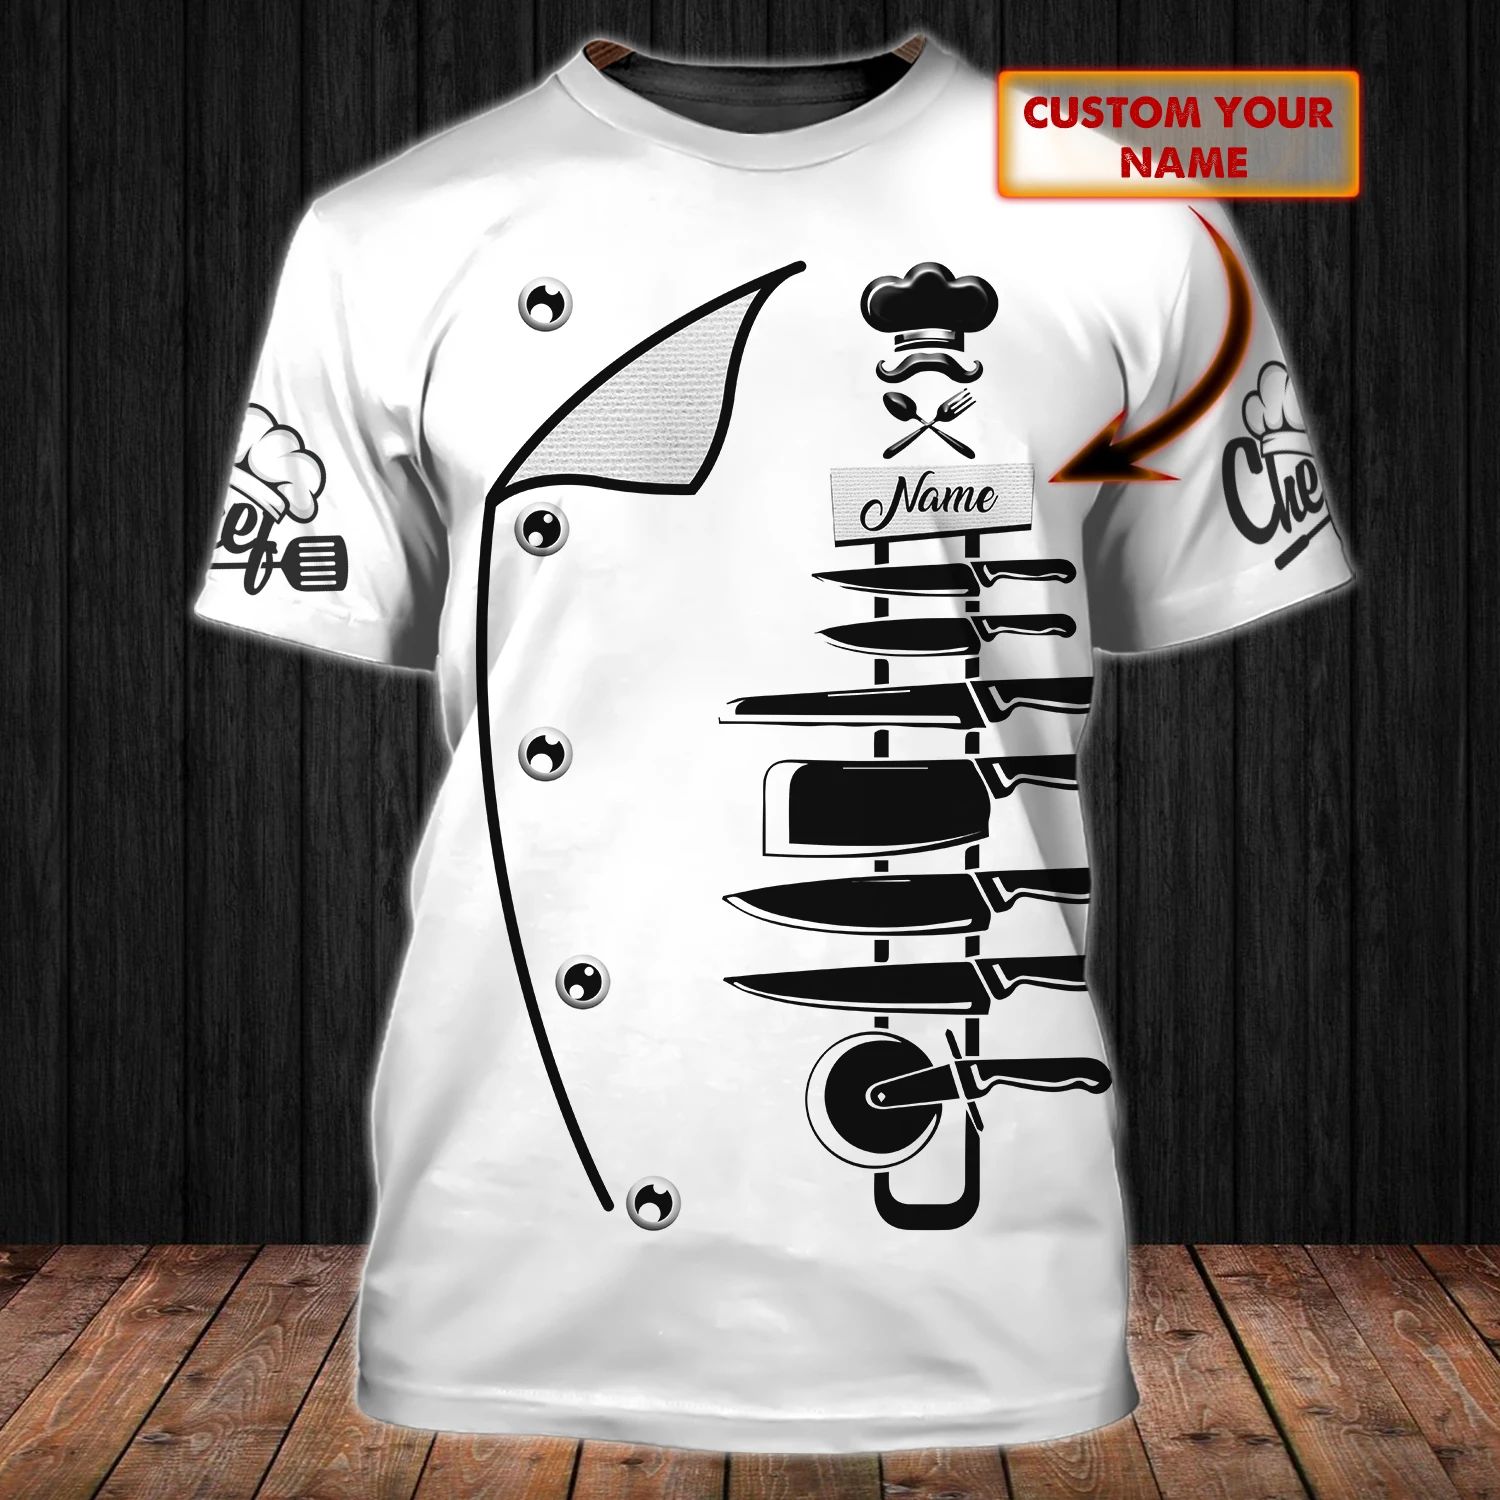 CHEF Costume Cosplay Personalized Name 3D All Over Print T-Shirt Style: 3D T-Shirt, Color: White